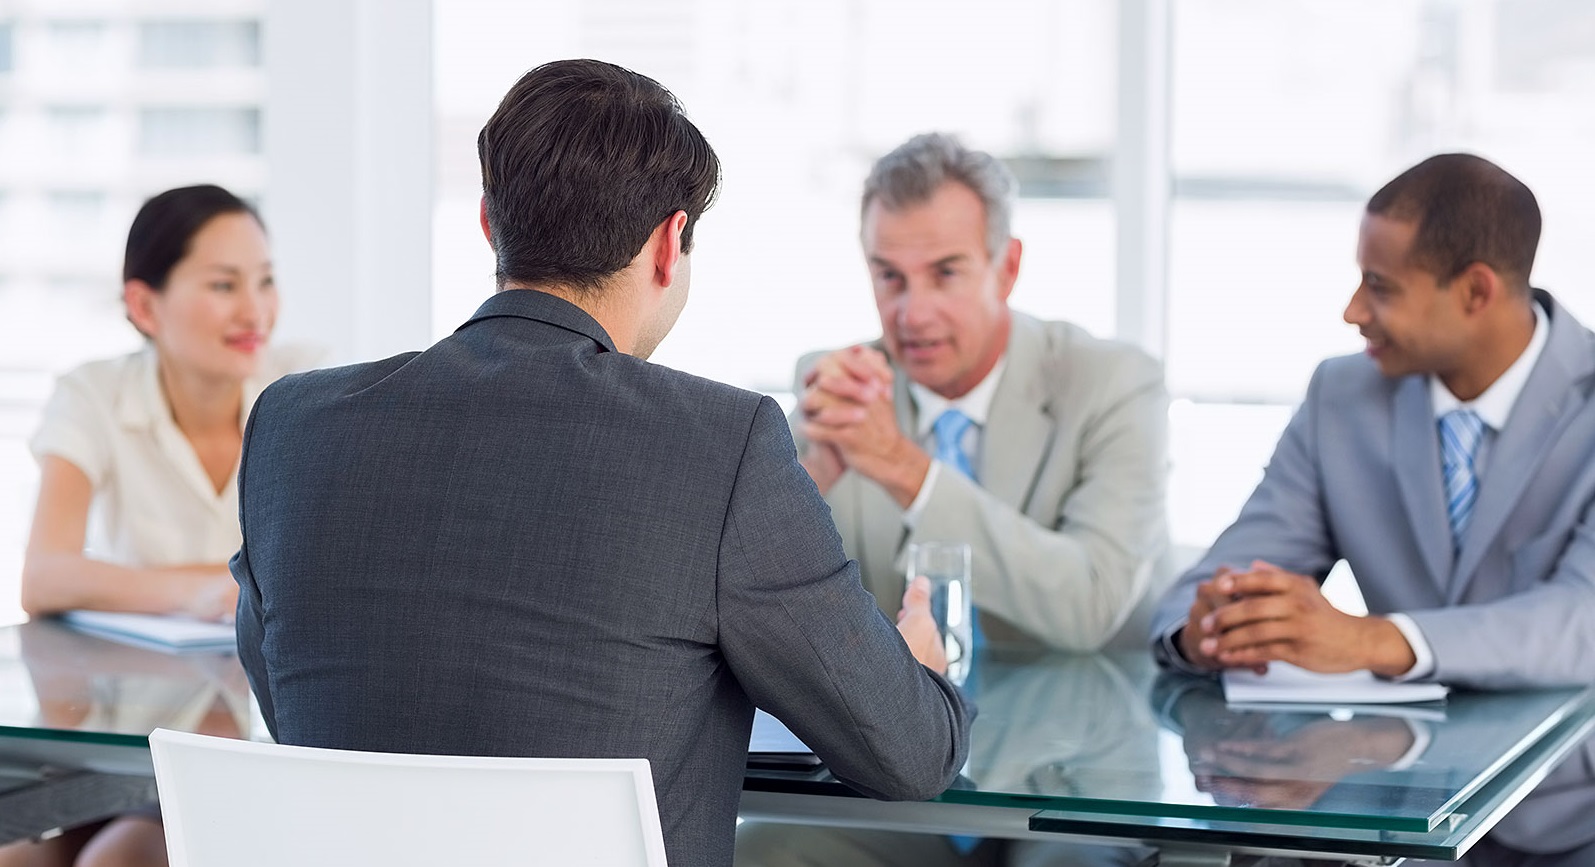 7 Pointers to Help You Ace Your Interview